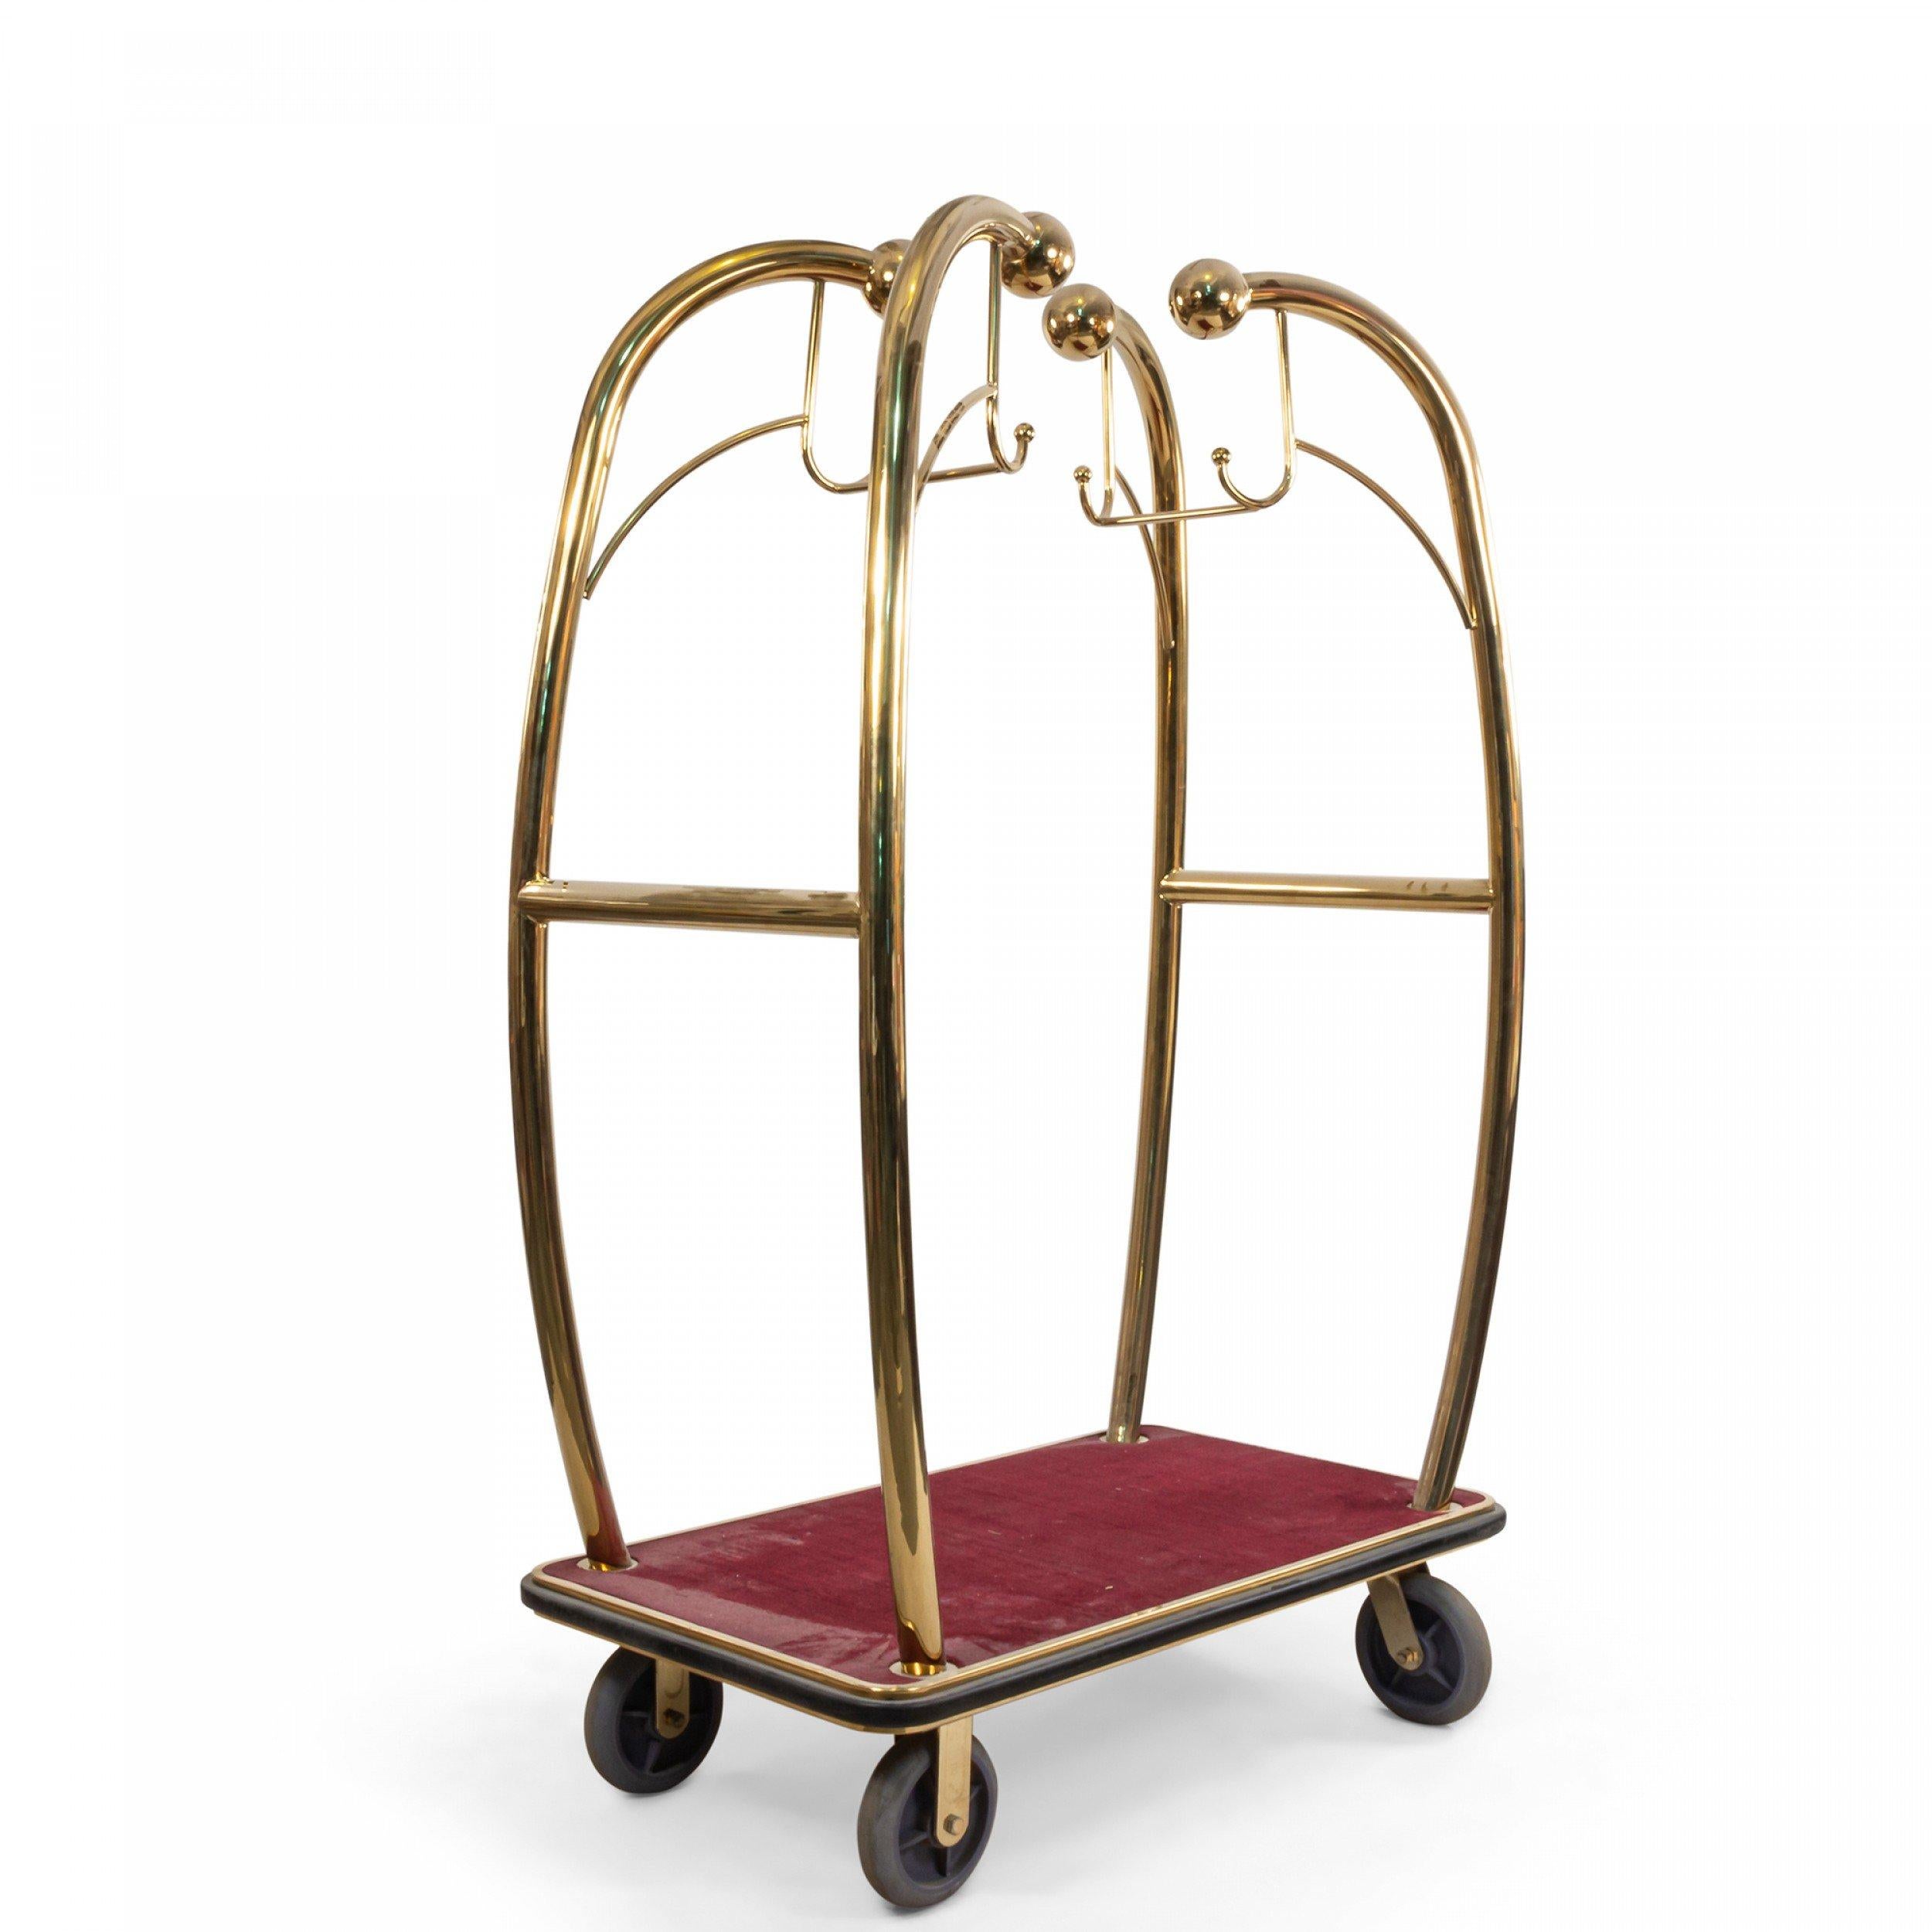 4 mid-century brass hotel bellhop's luggage and hanging garment racks with red carpeted platforms (priced each).
  